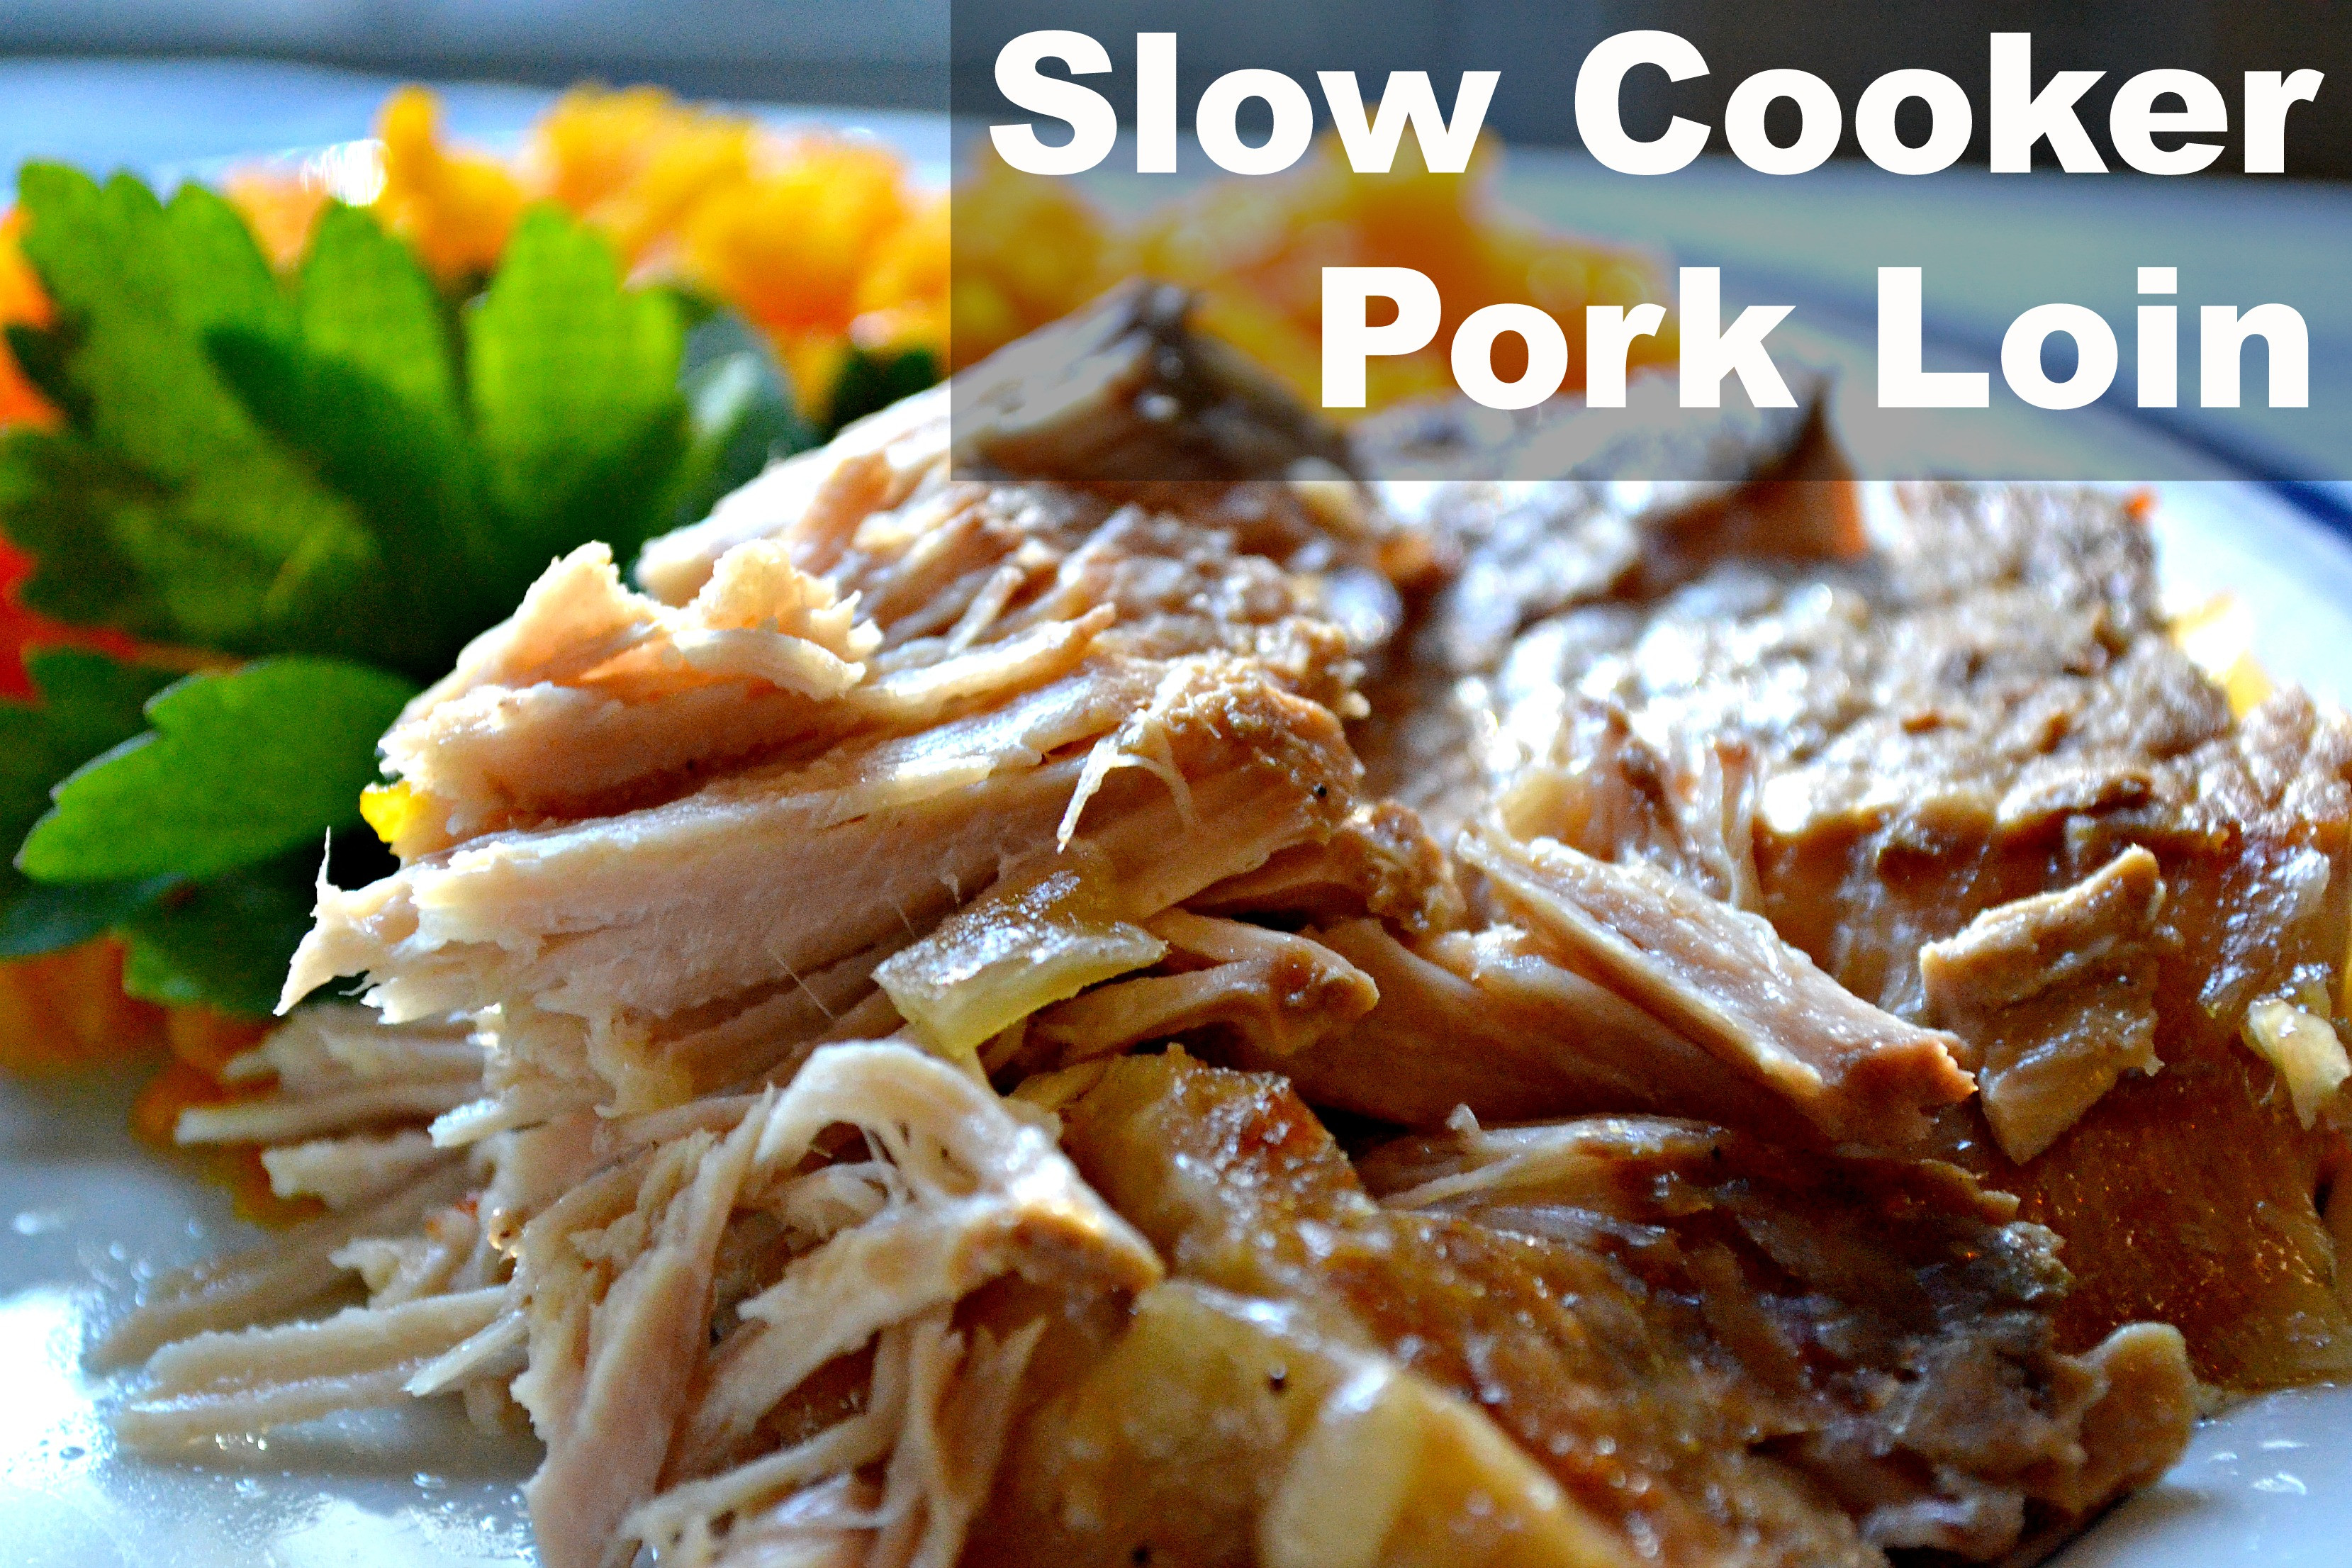 Pork Loin Recipes Slow Cooker
 Two Slow Cooker Pork Loin Recipes Blissfully Domestic